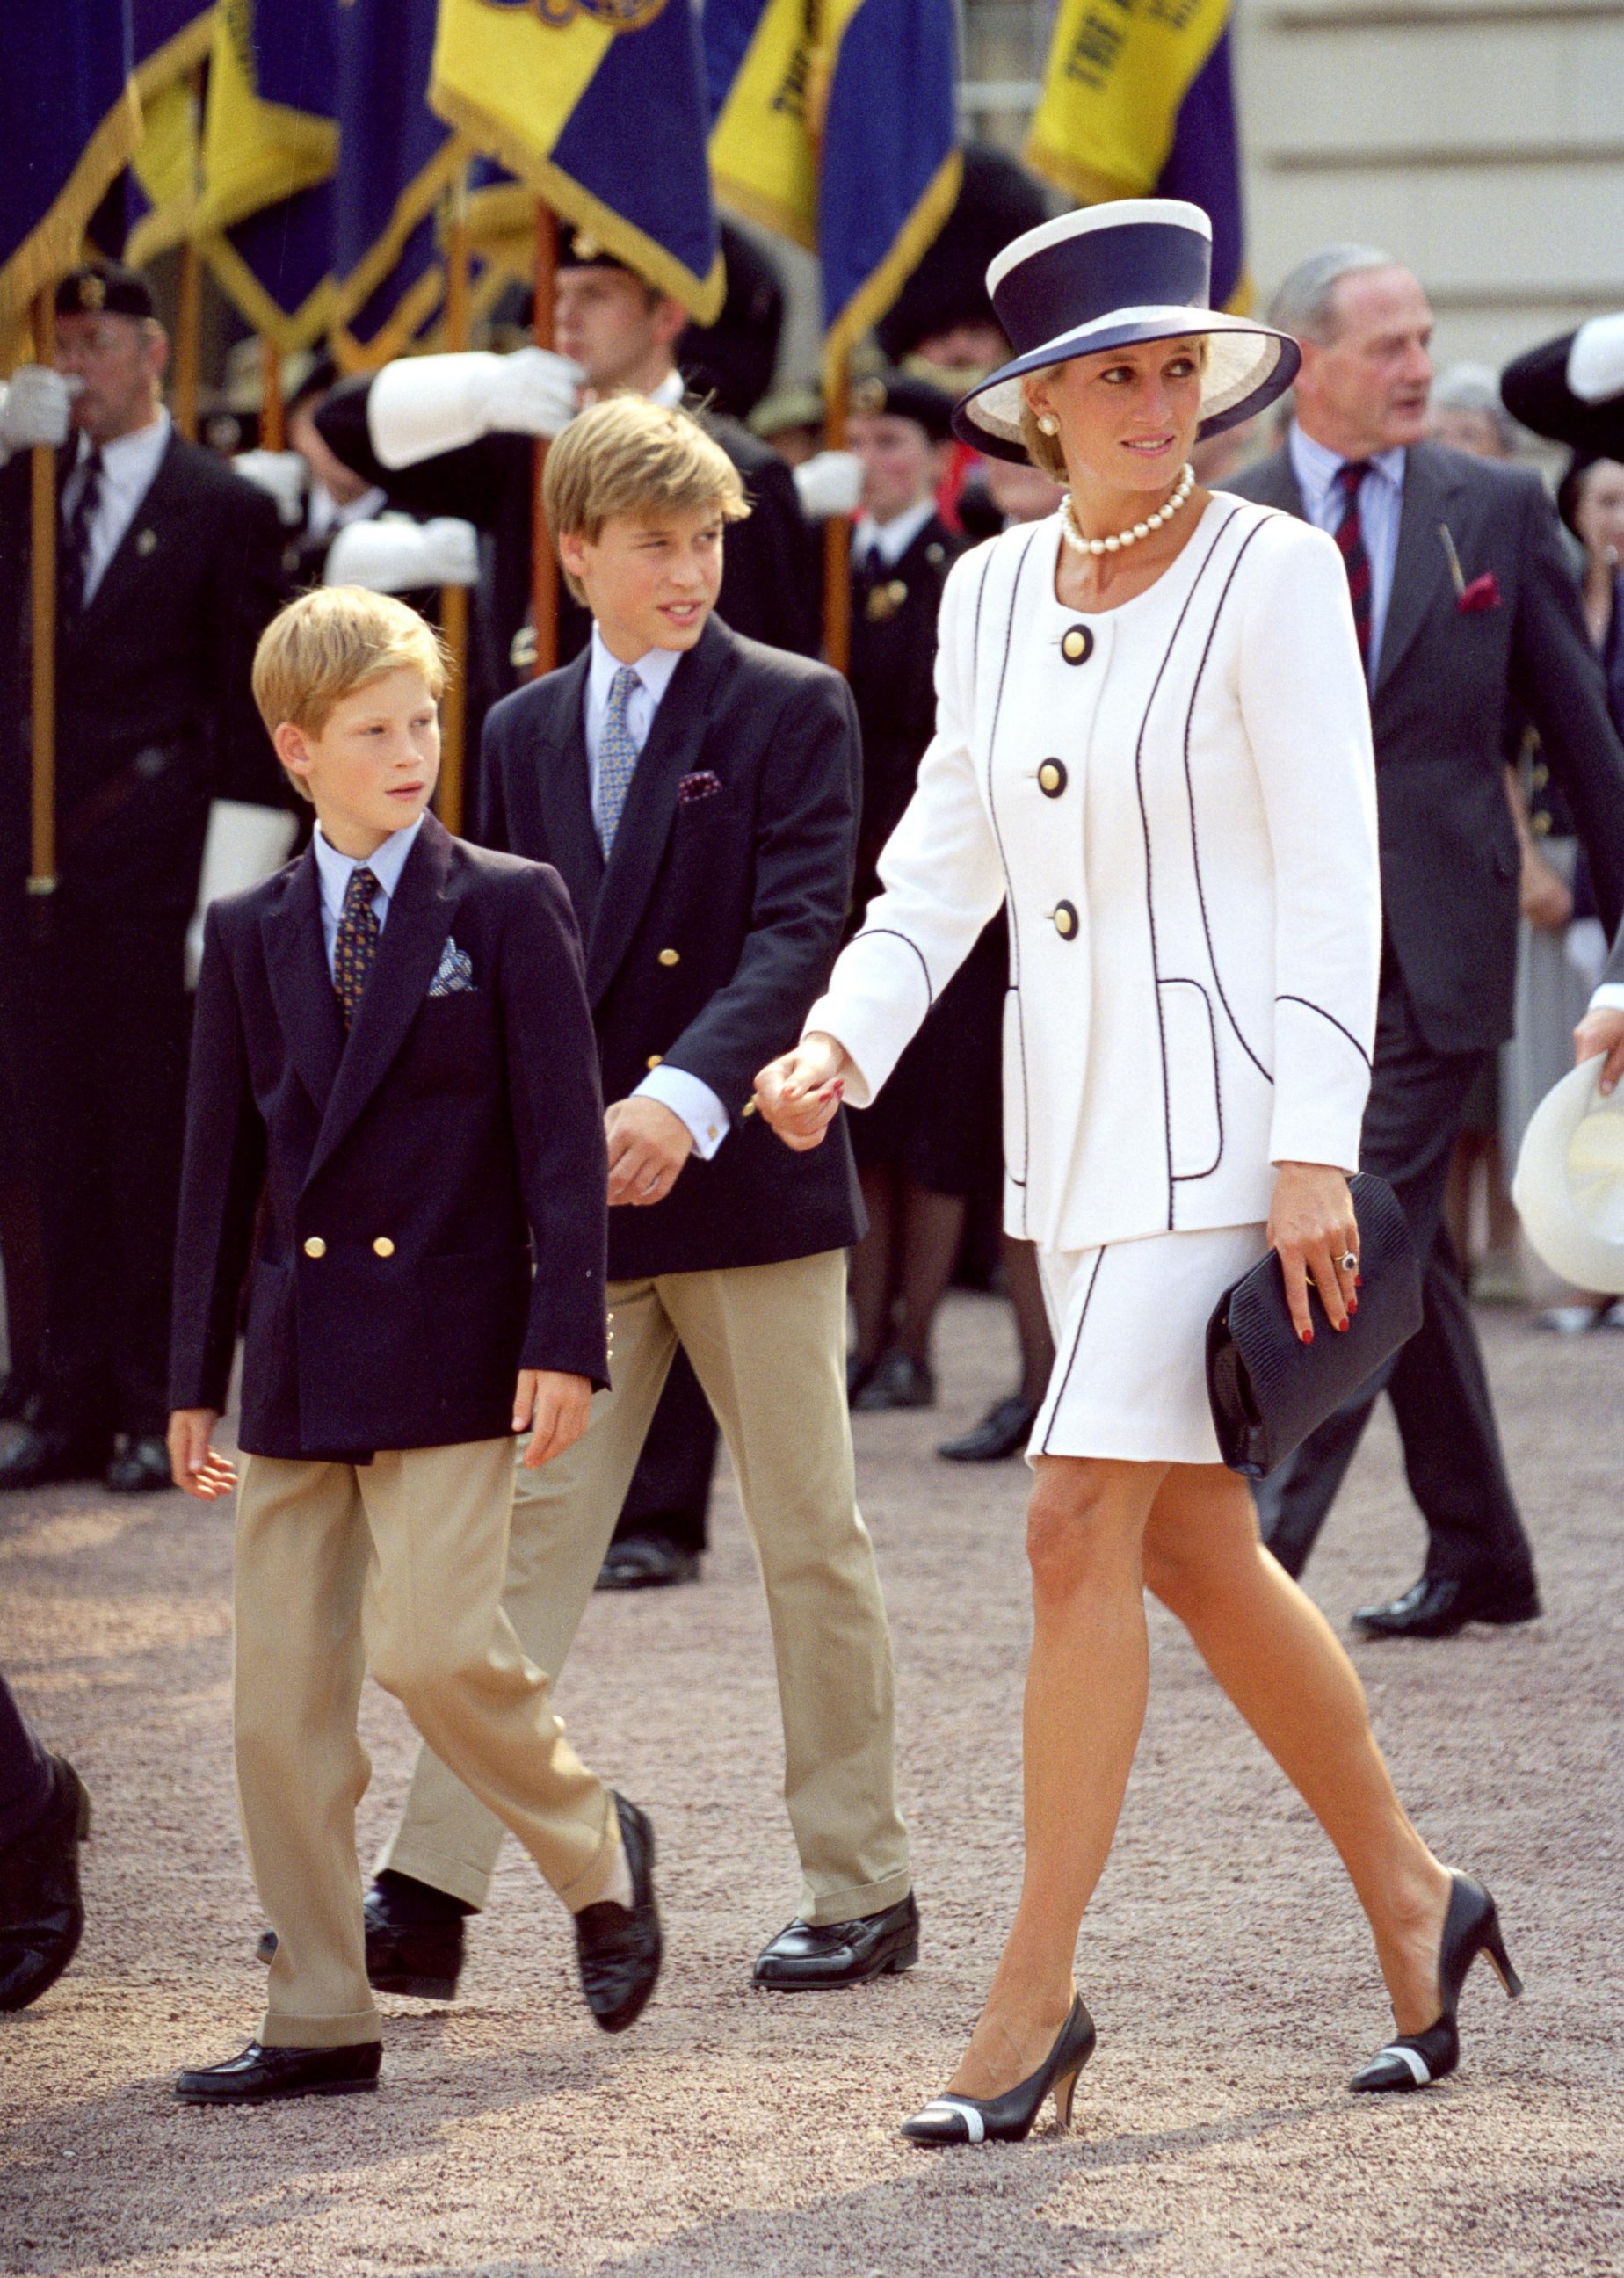 PHOTO: Diana, Princess of Wales and Princes William and Harry attend an event In London on Aug, 19, 1995.